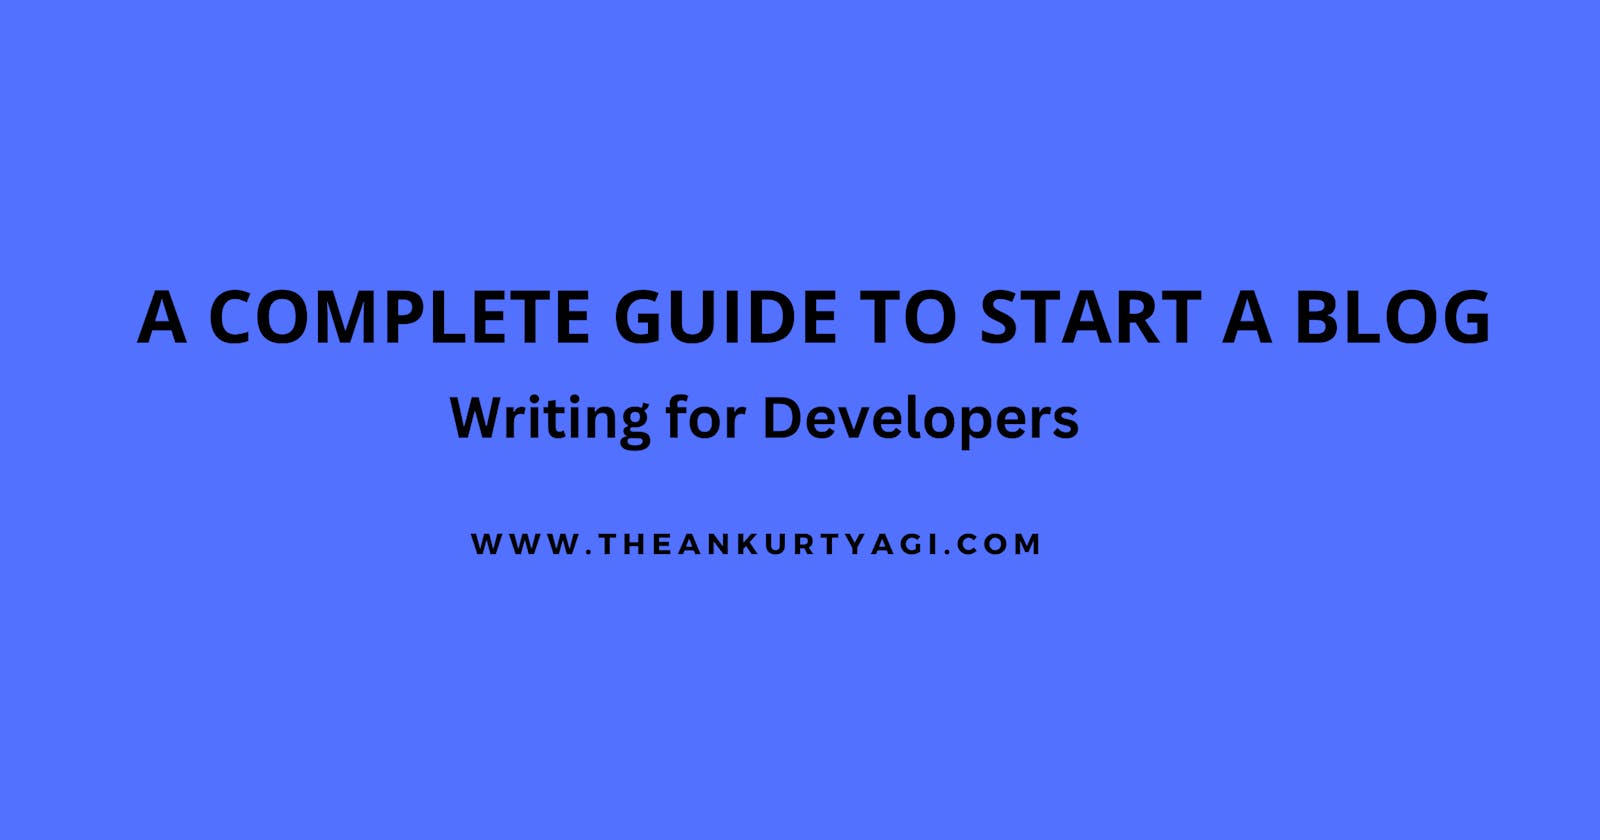 A Complete Step-by-Step Guide to Start a Blog for Software Developers